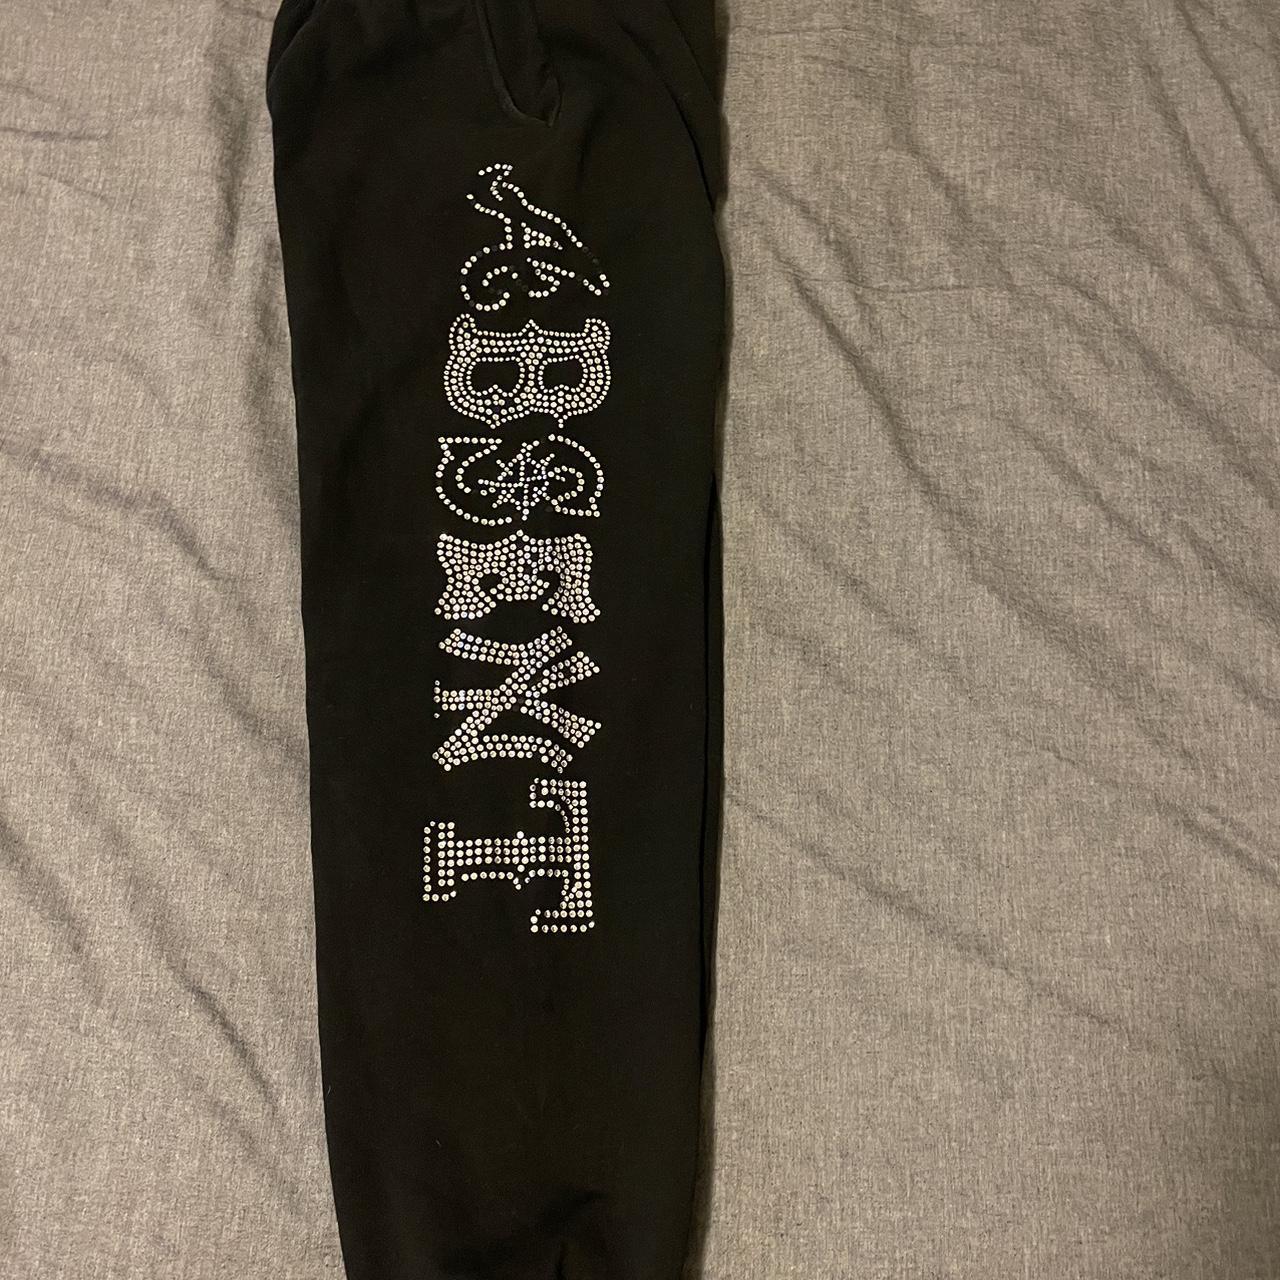 Product Image 3 - Super clean absent sweatpants!! Missing